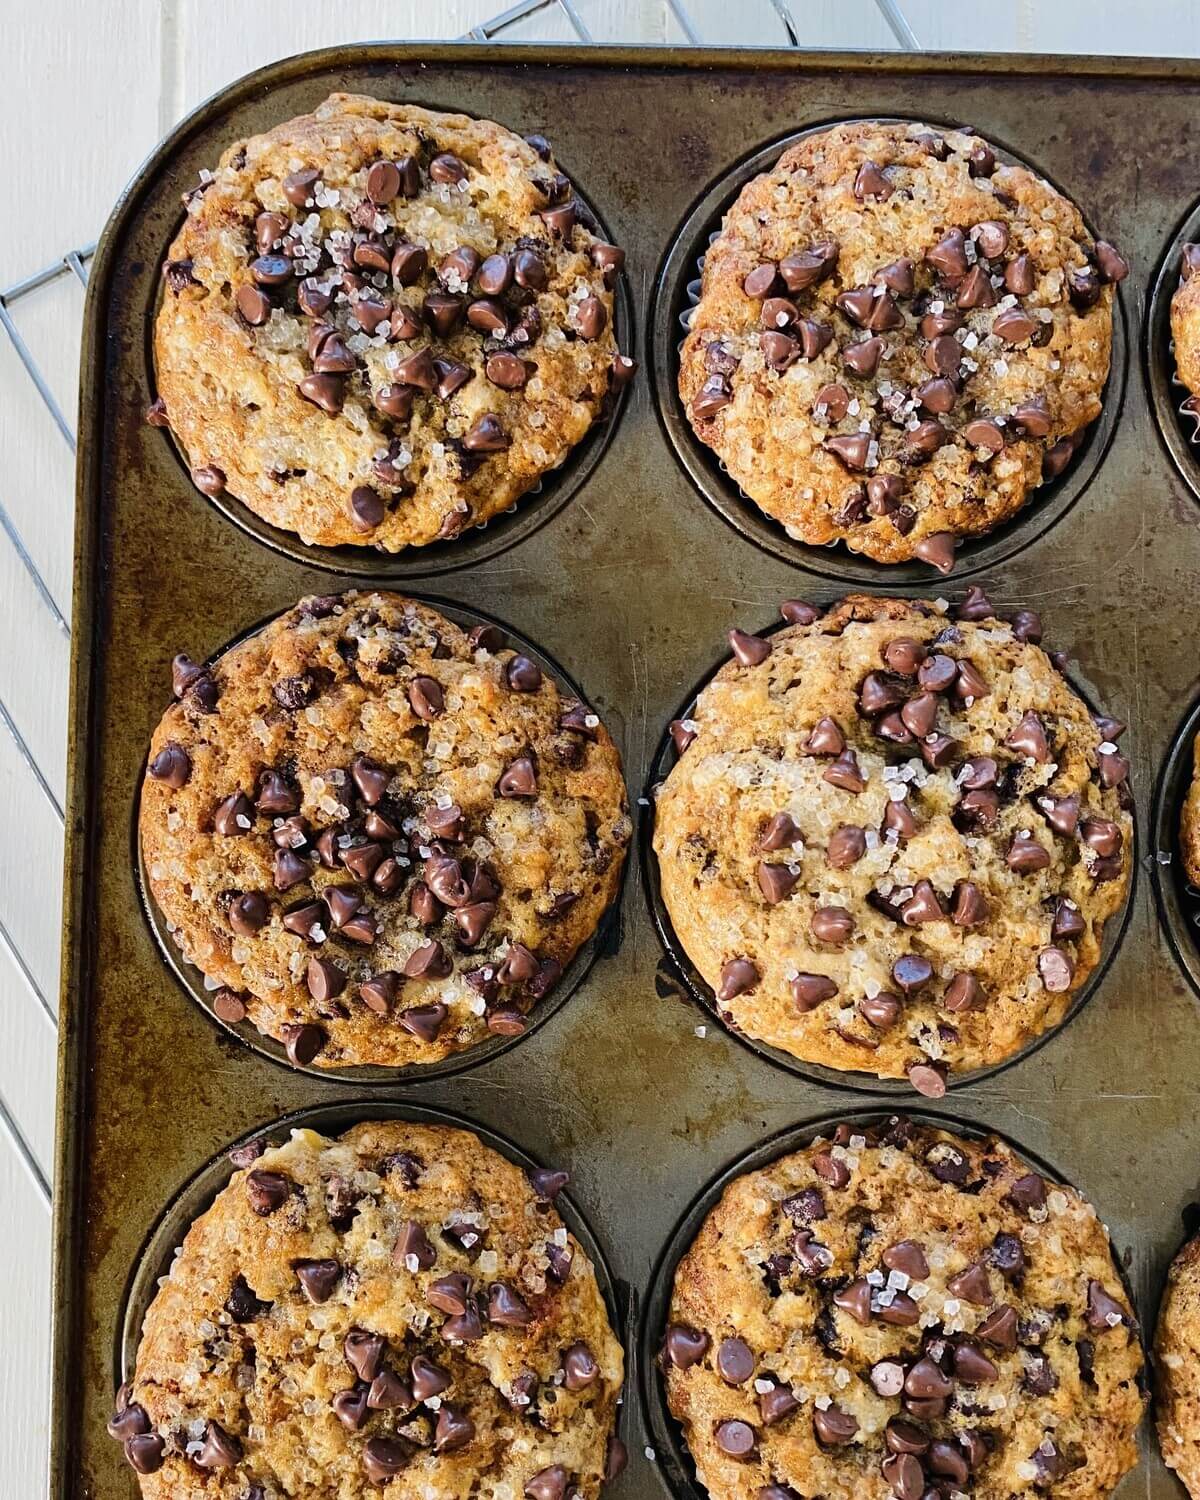 6 baked banana muffins in a pan.